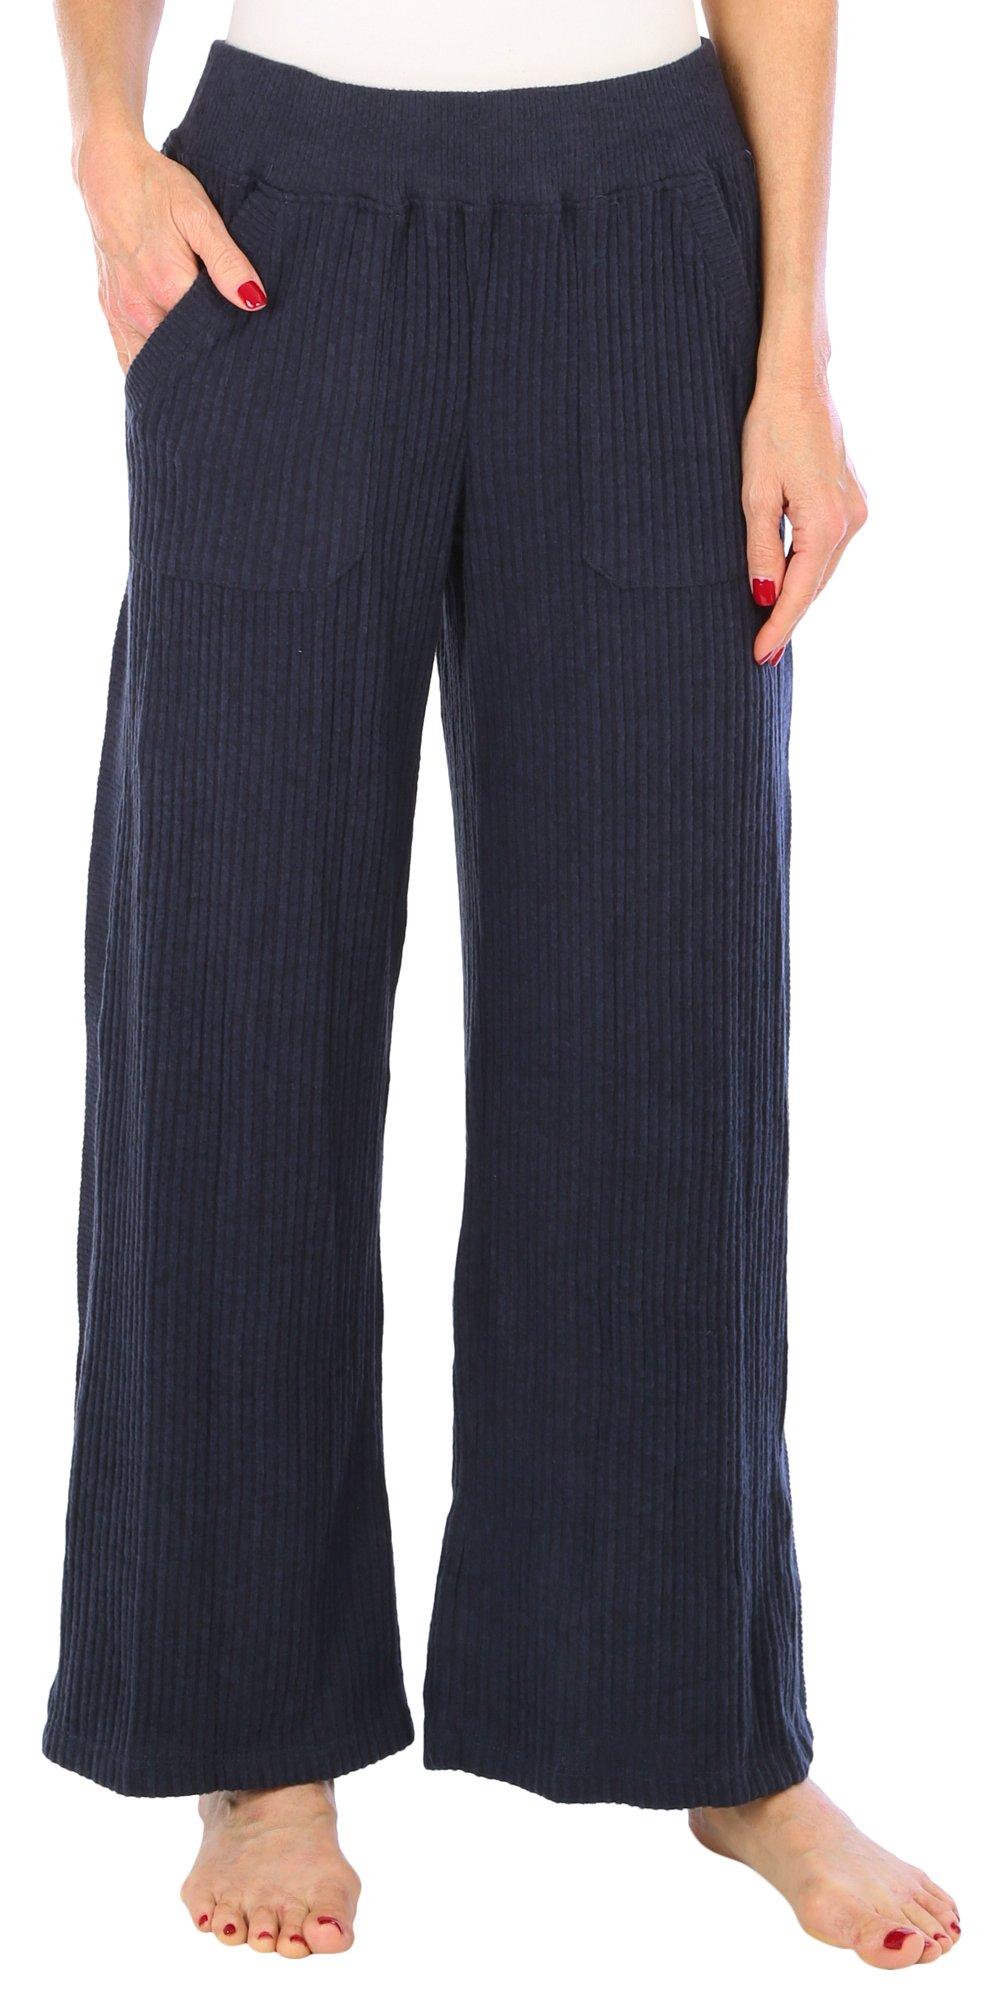 Womens Solid Hi-Rise Mitred Waistband Pant